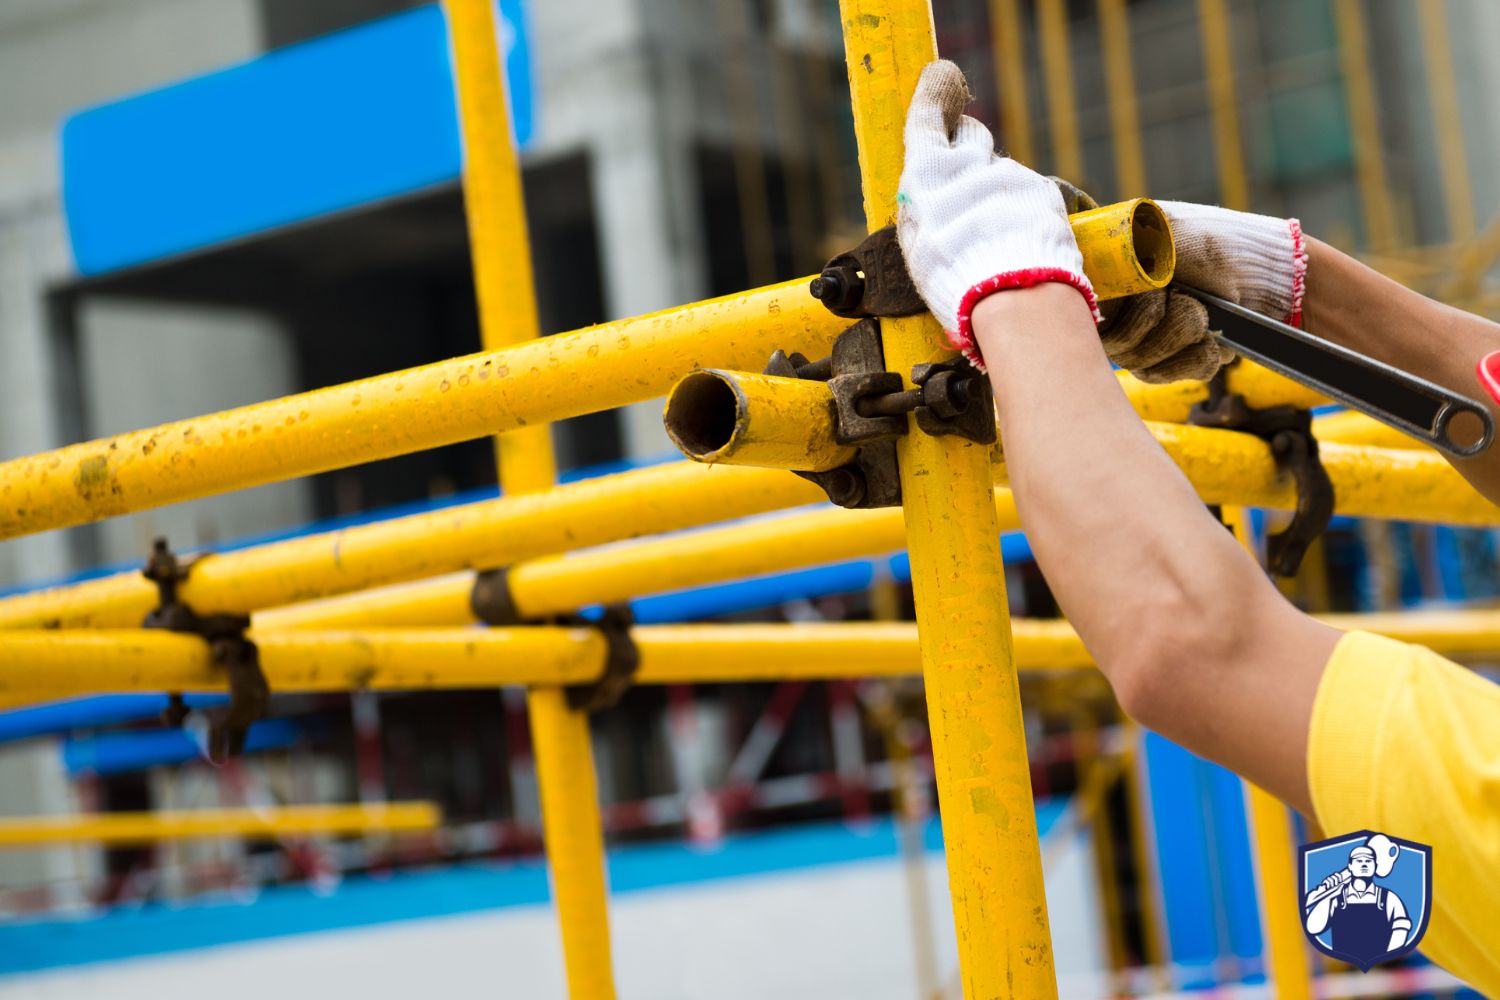 Safety First: What Does UK Law Say About Scaffolding?